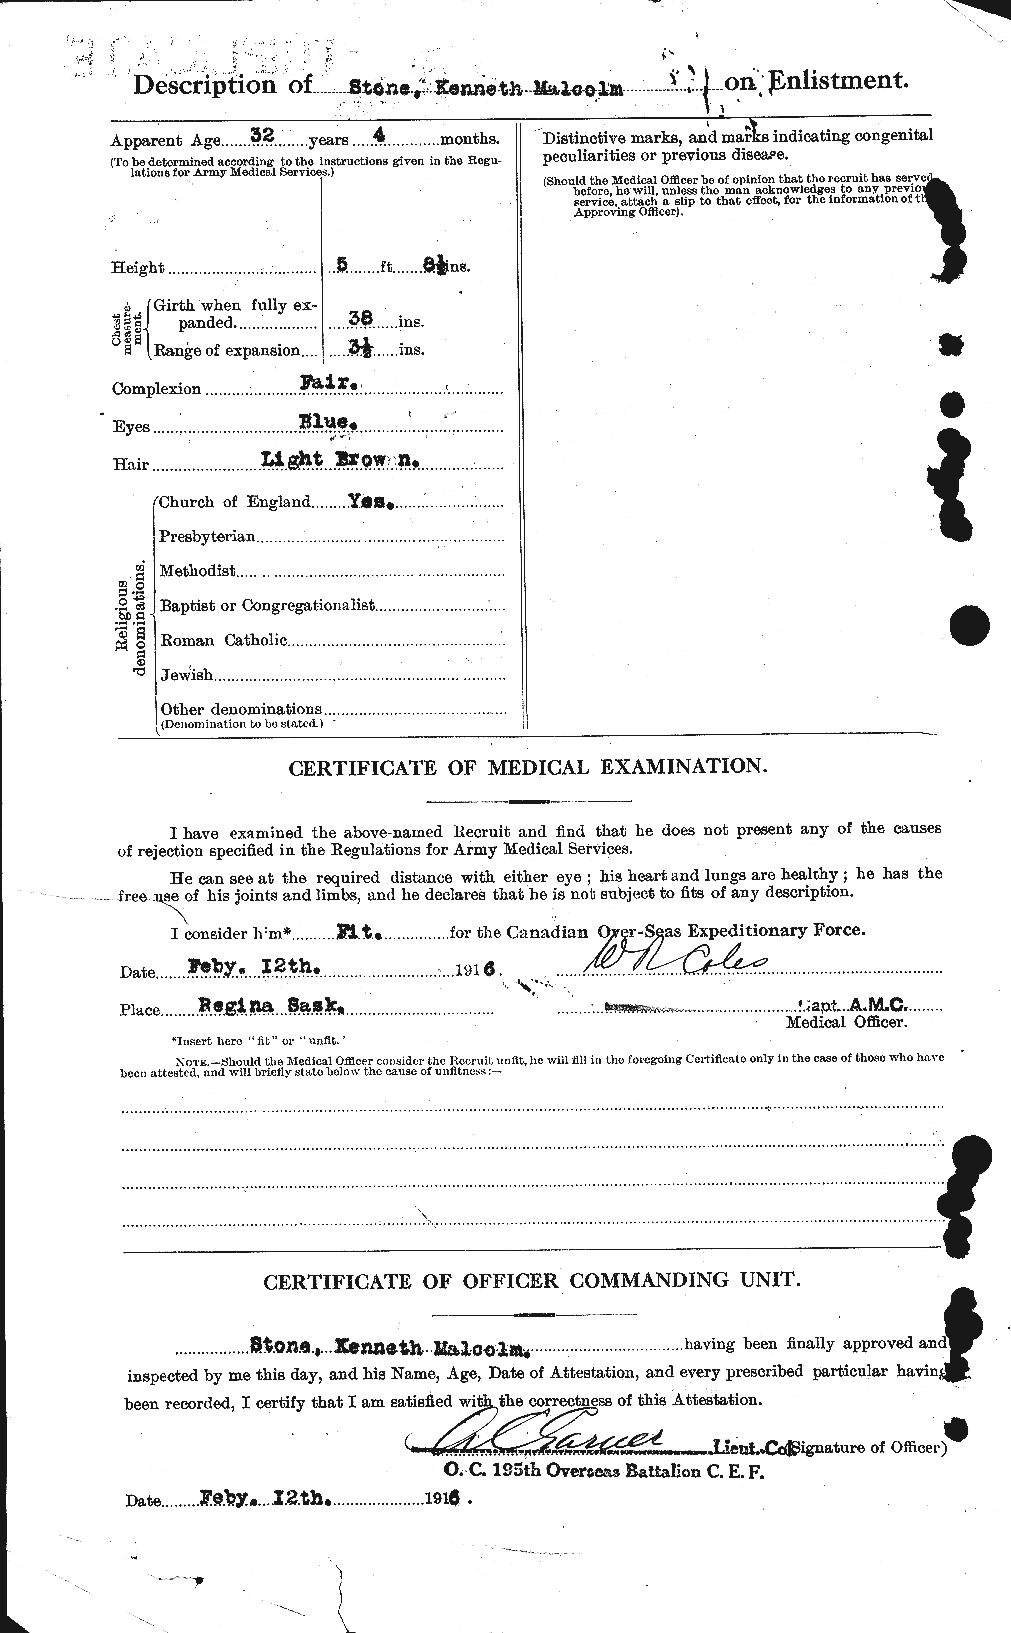 Personnel Records of the First World War - CEF 121920b